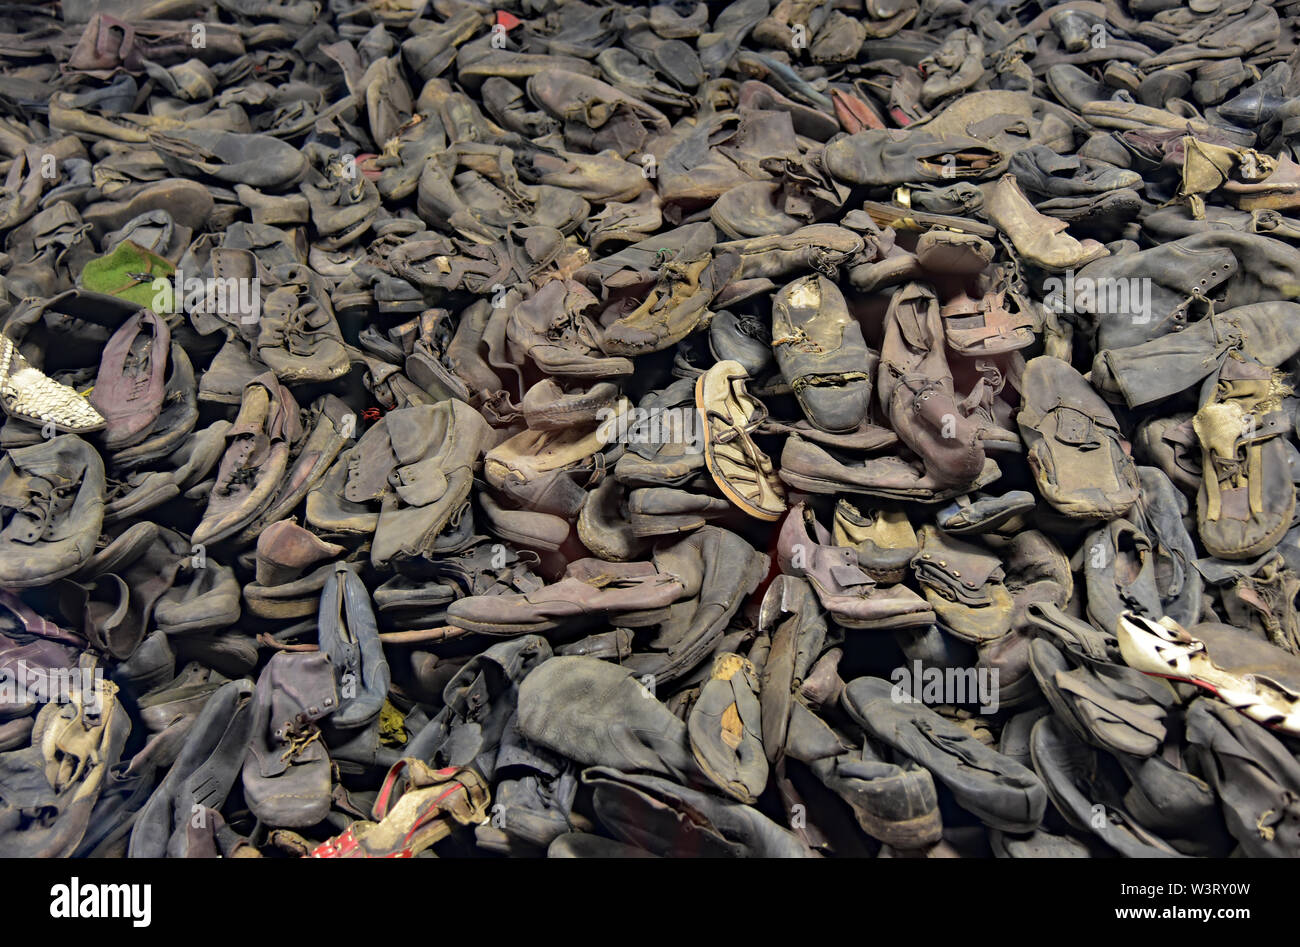 8,000 pairs of shoes (out of 1.3 million victims) represent a day's executions at the height of the Holocaust. Block 5, Auschwitz, Poland, Europe. Stock Photo